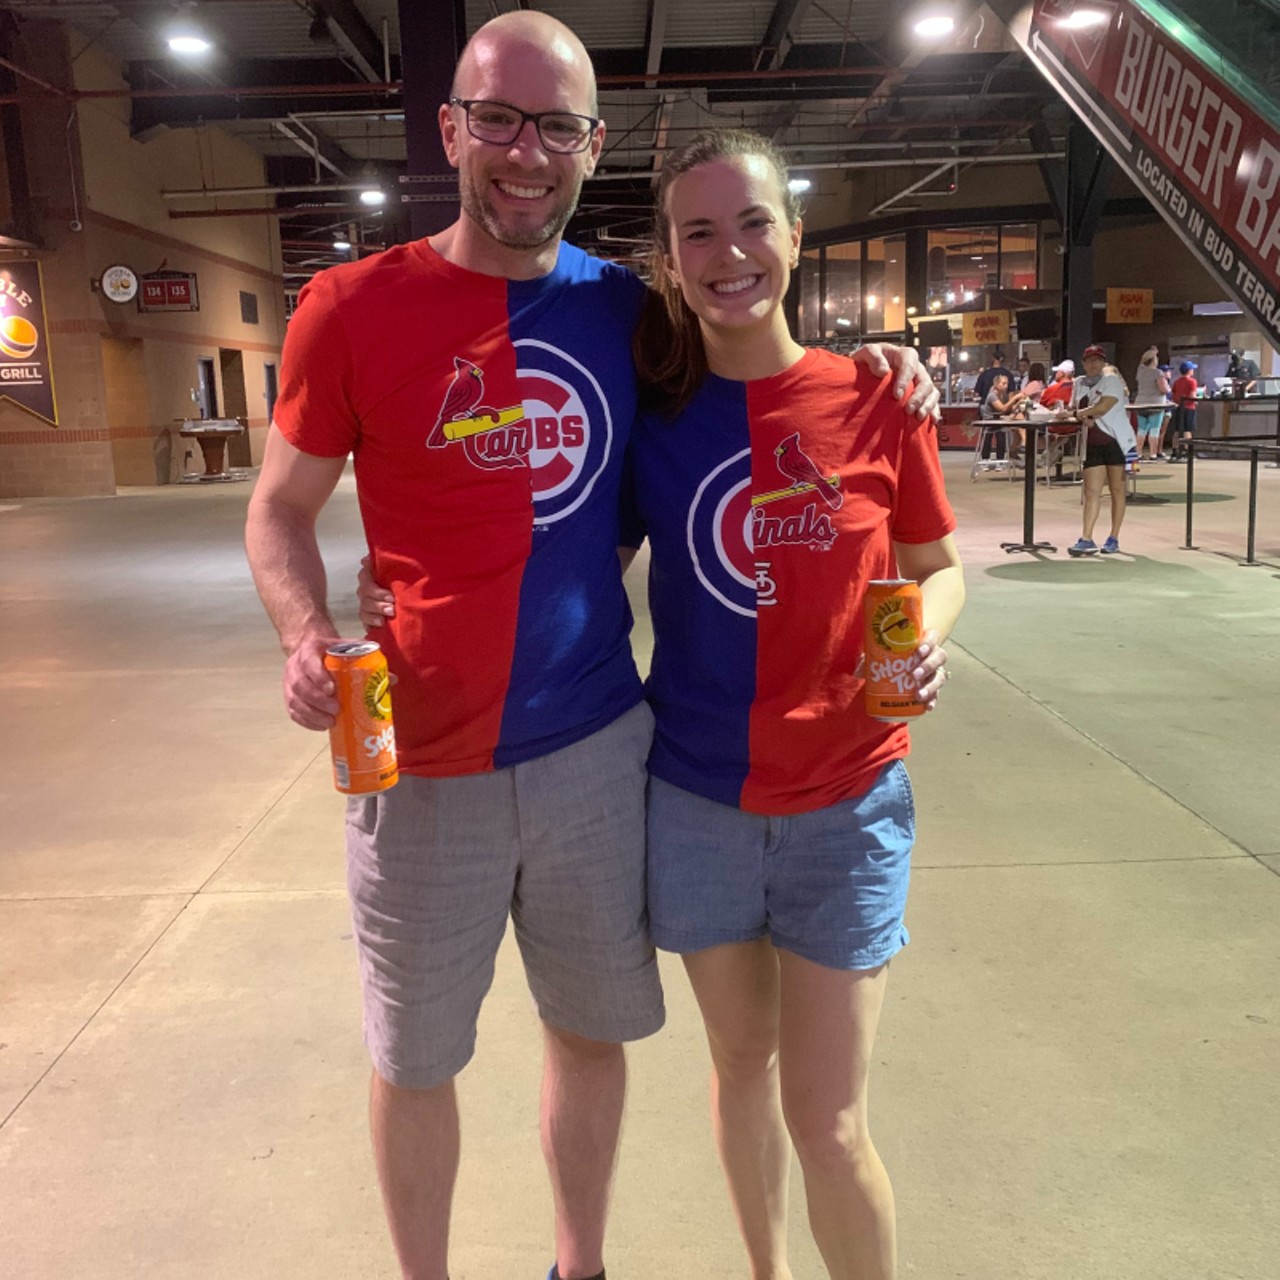 St. Louis Cardinals vs. Chicago Cubs Rivalry Game Series May 23, 2021  [PHOTOS], St. Louis